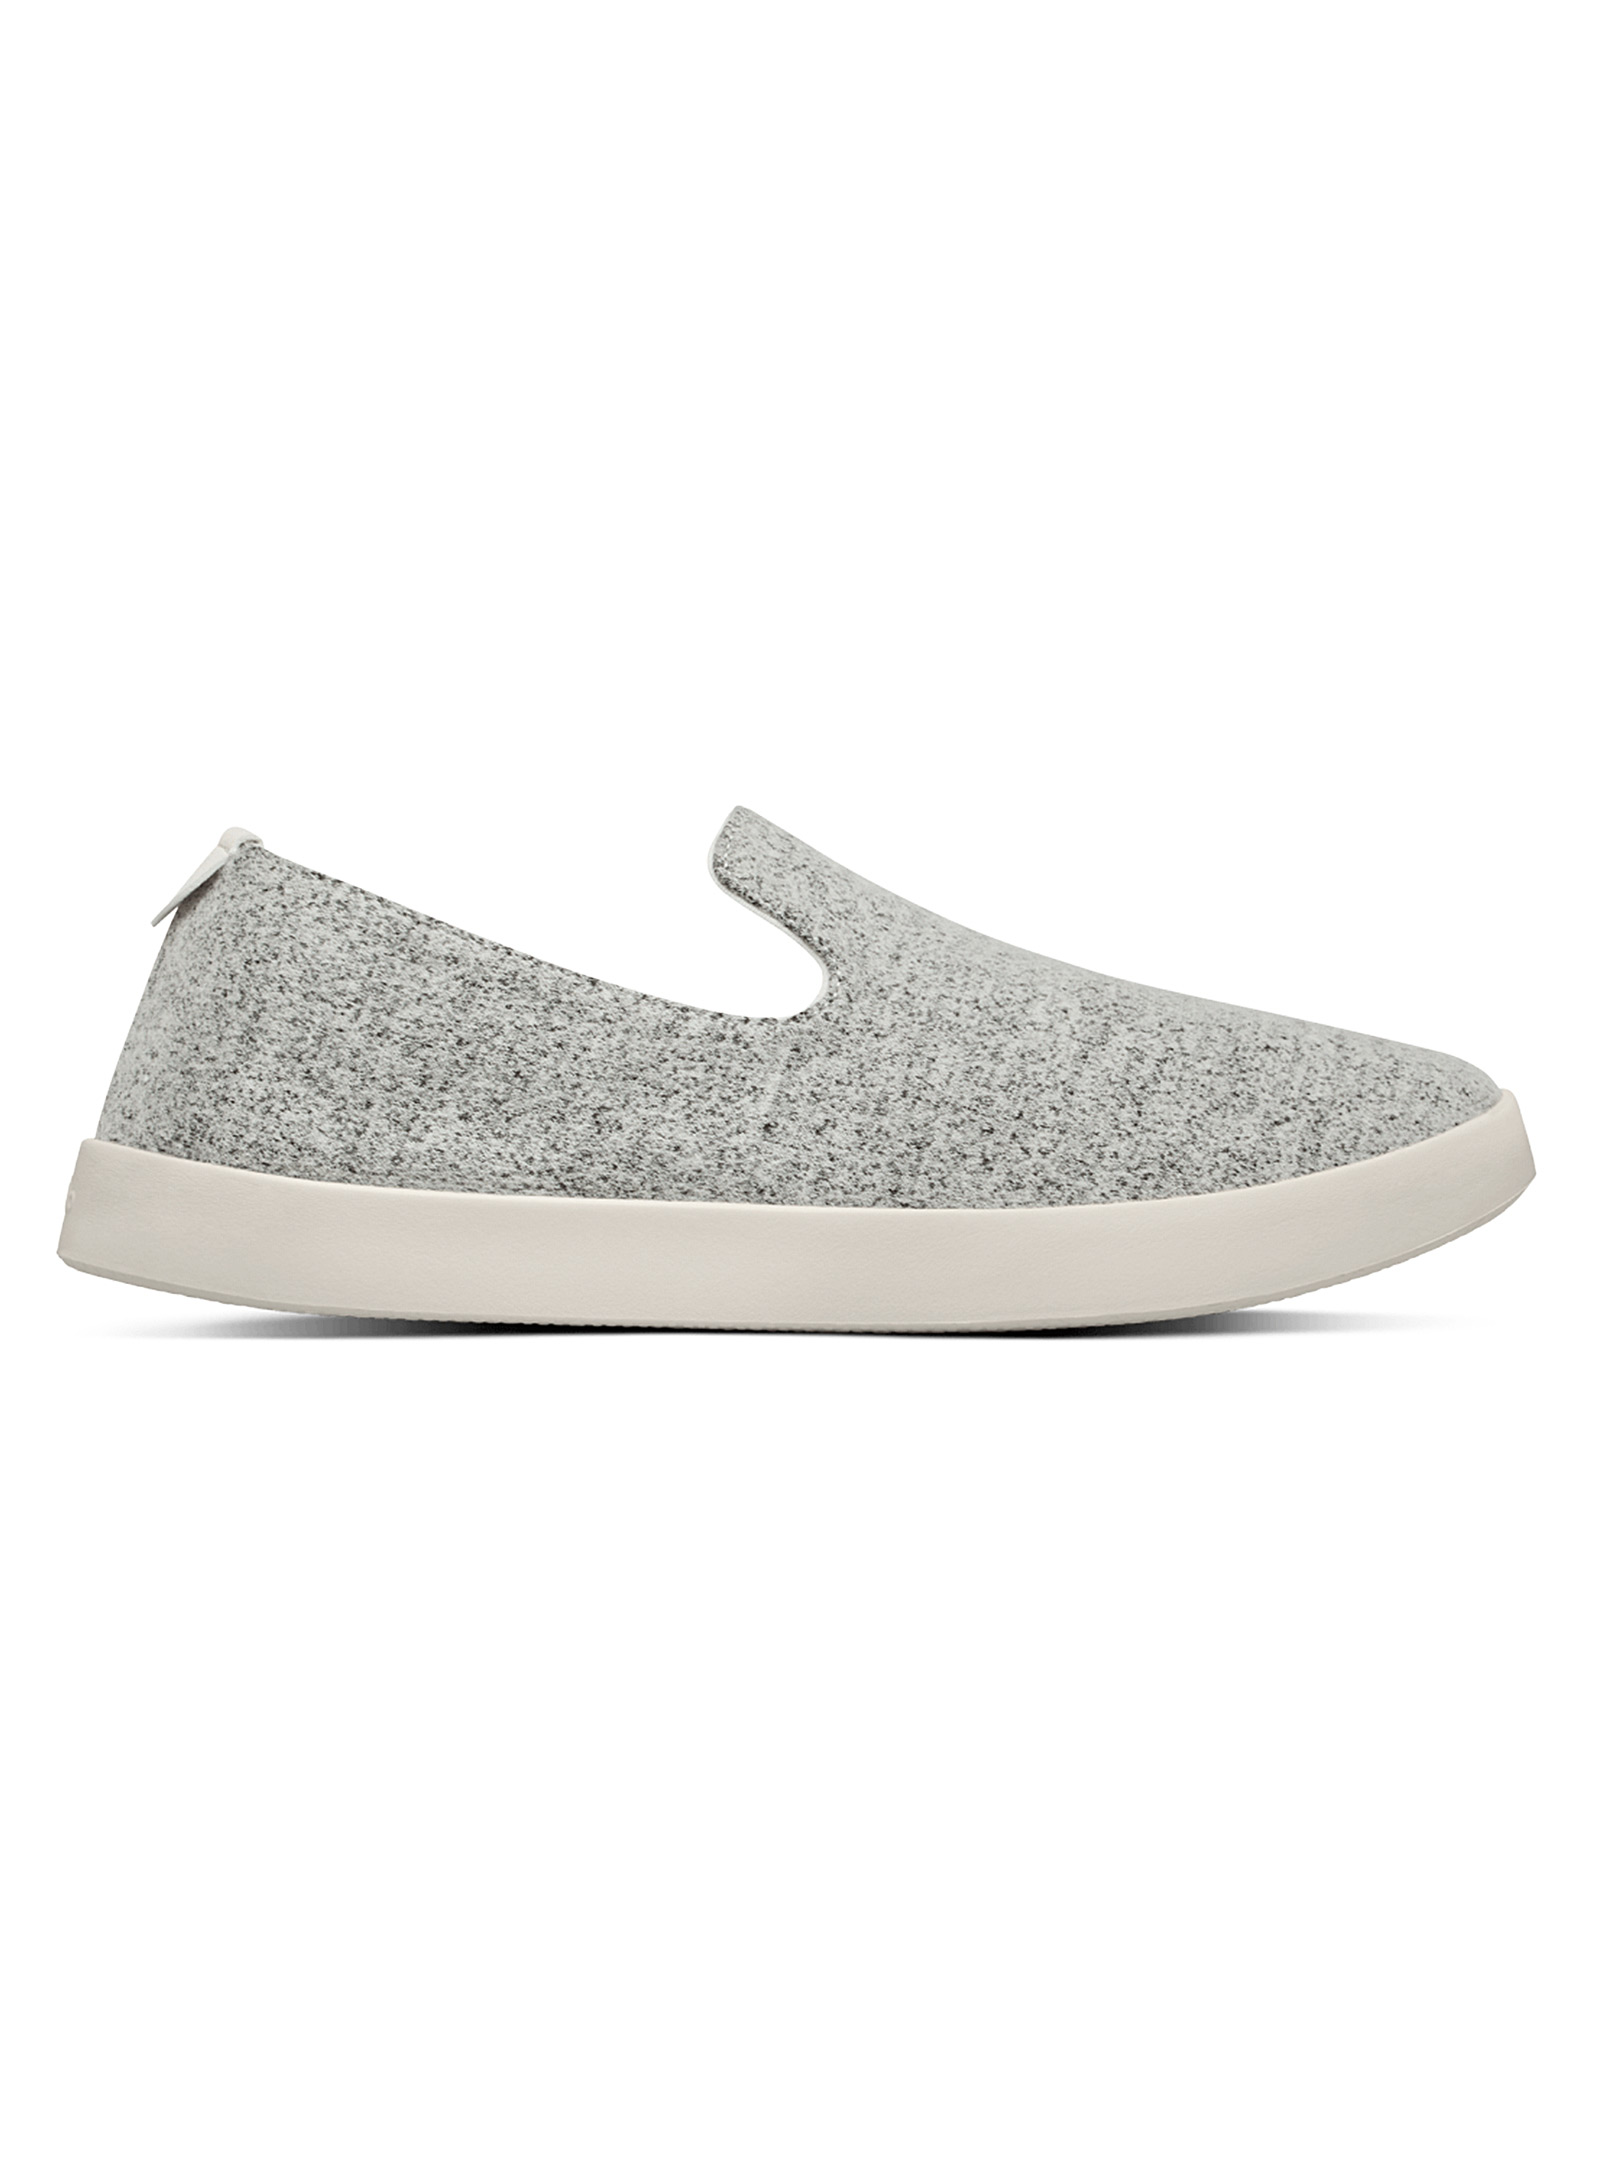 Allbirds - Chaussures Le Slip-On Wool Lounger Homme